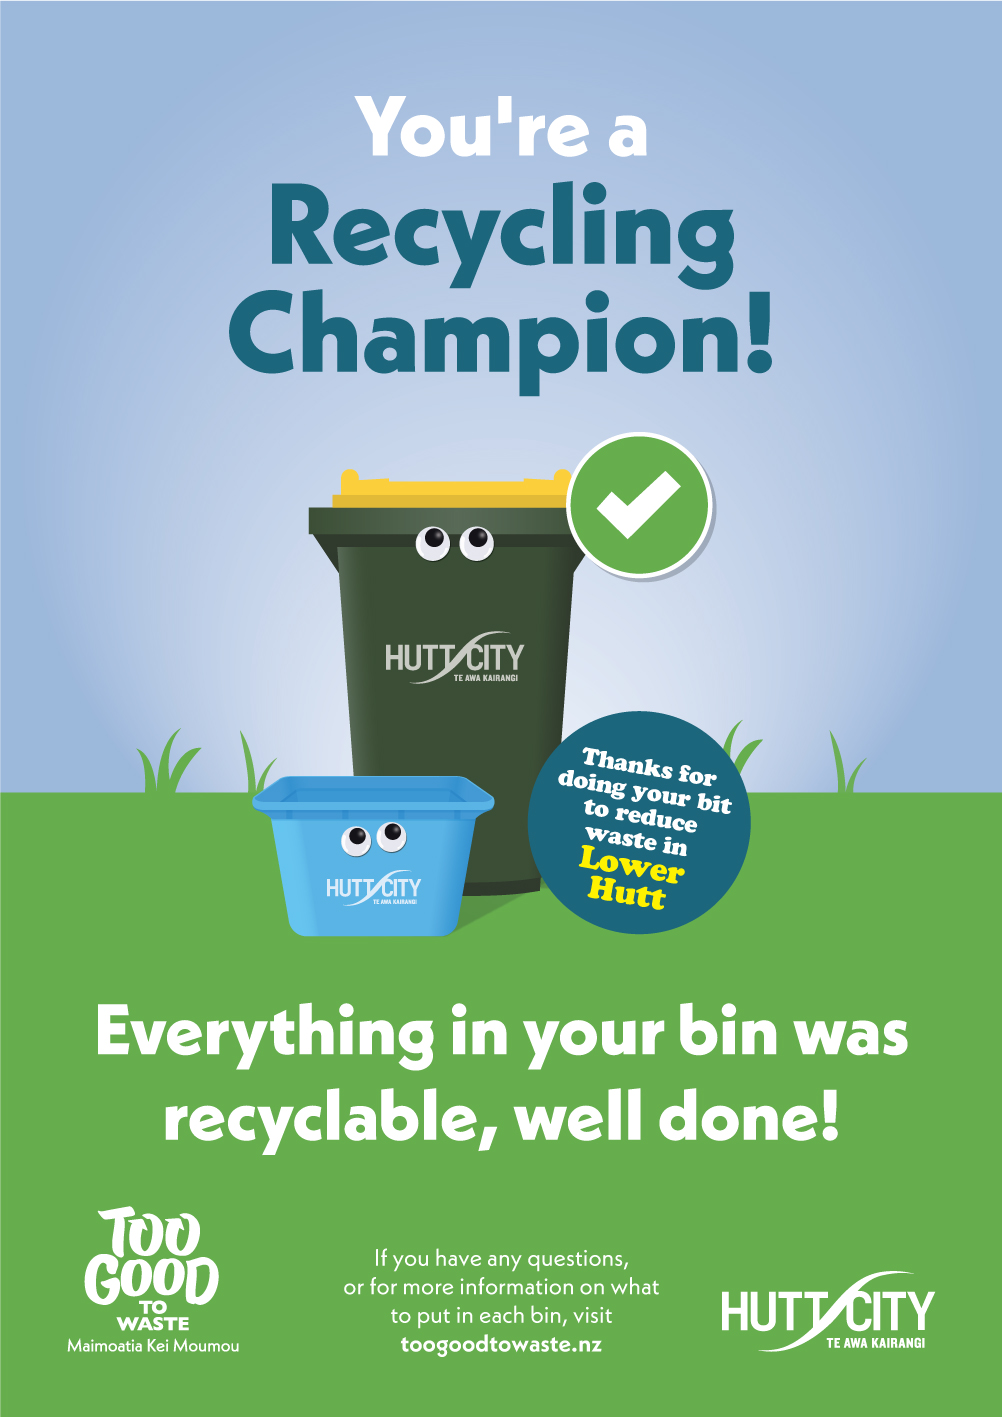 Recycling bins on a blue and green background. Text reads You're a recycling champion!